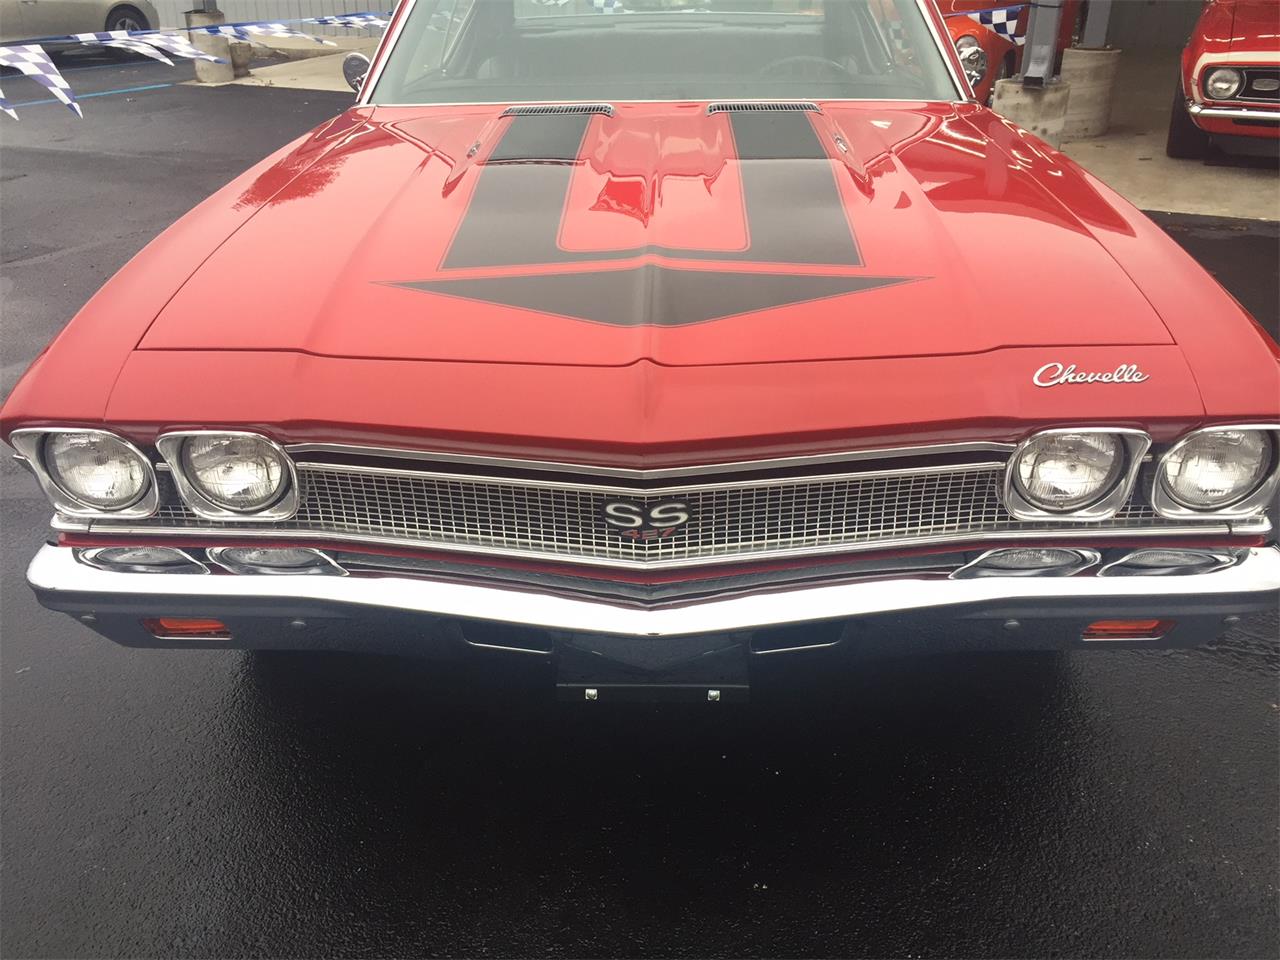 1968 Chevrolet Chevelle SS for Sale | mediakits.theygsgroup.com | CC-1067035